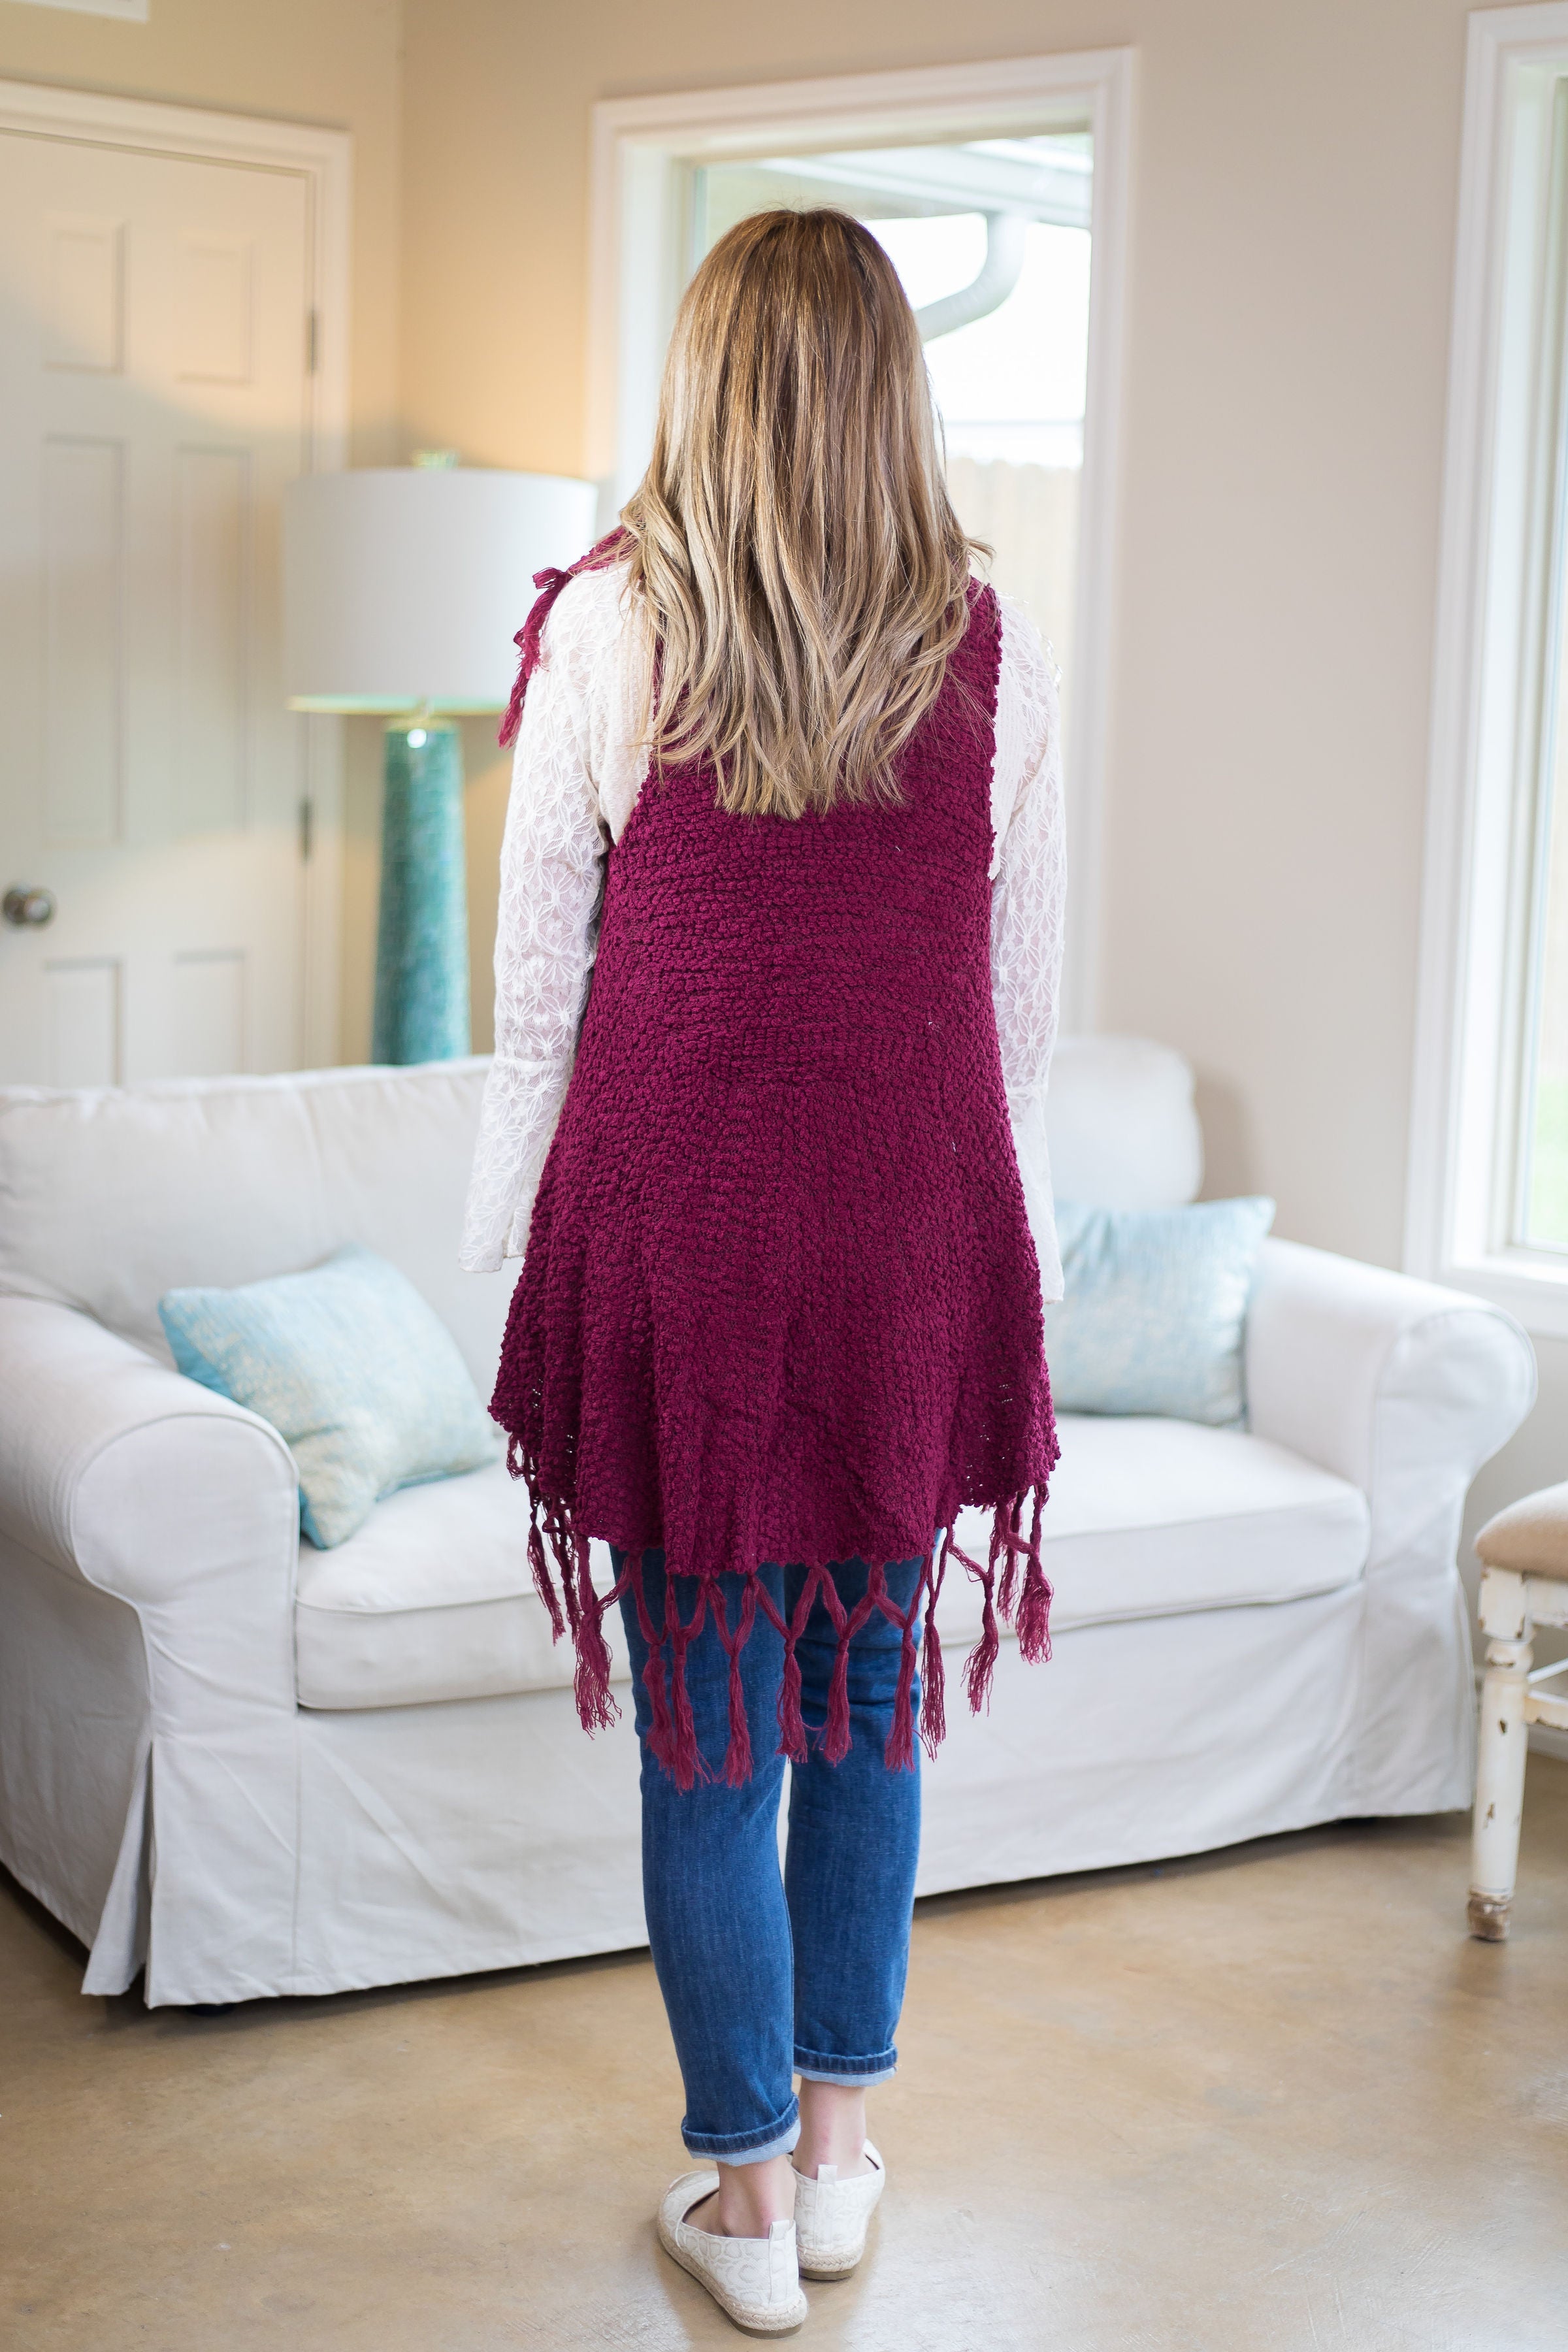 Sunday Sights Vest with Tassel Trim in Maroon - Giddy Up Glamour Boutique